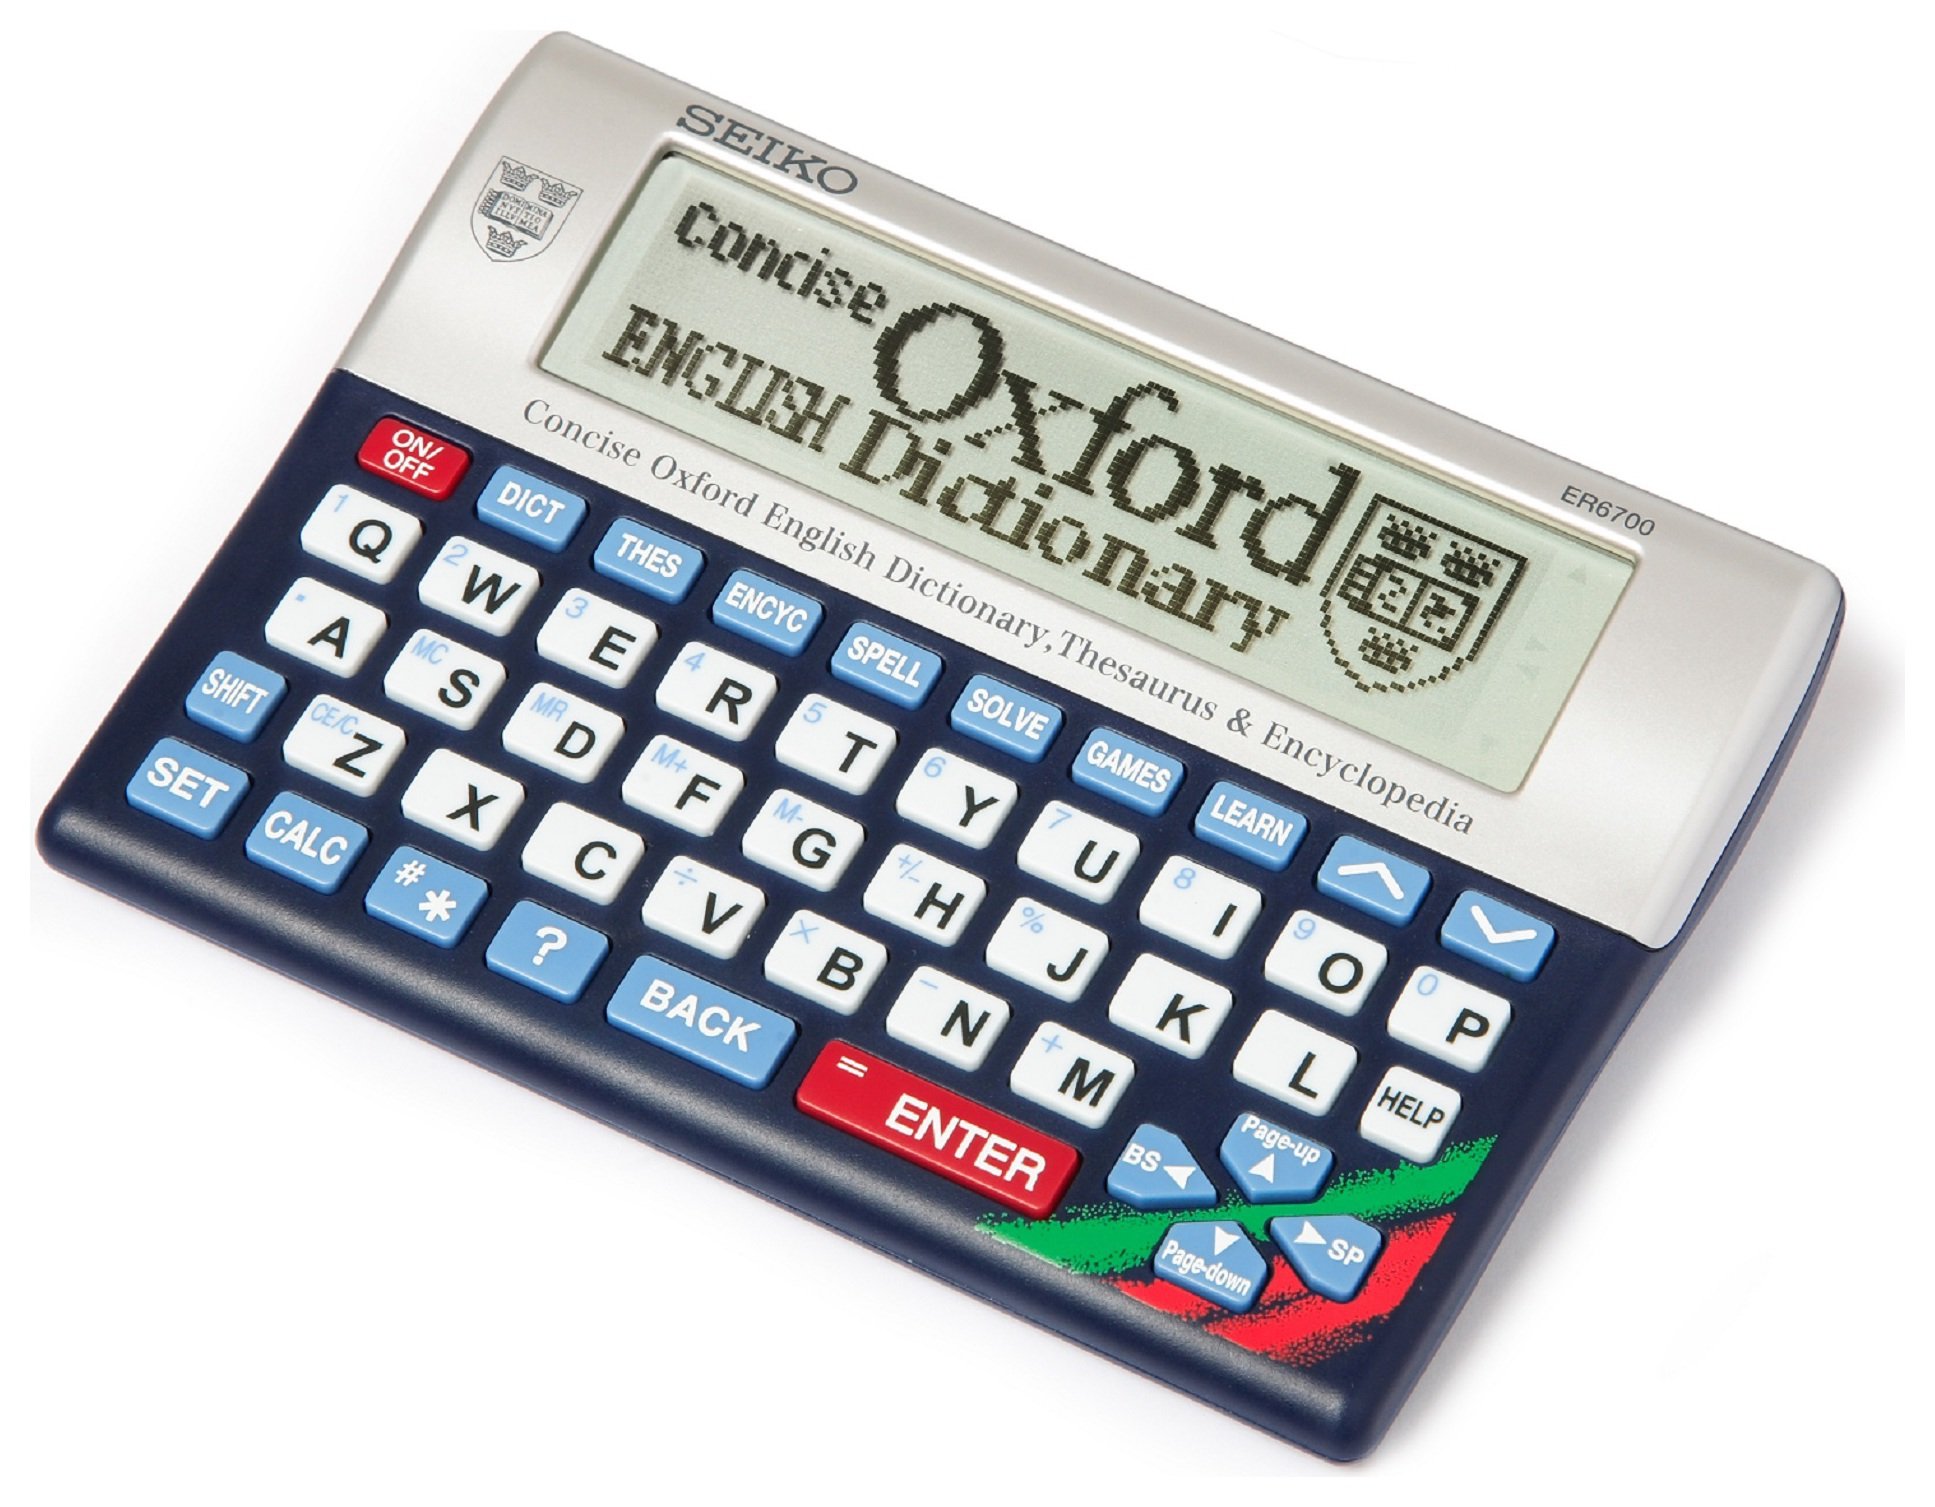 Seiko ER6700 Concise Oxford Electronic Dictionary Review